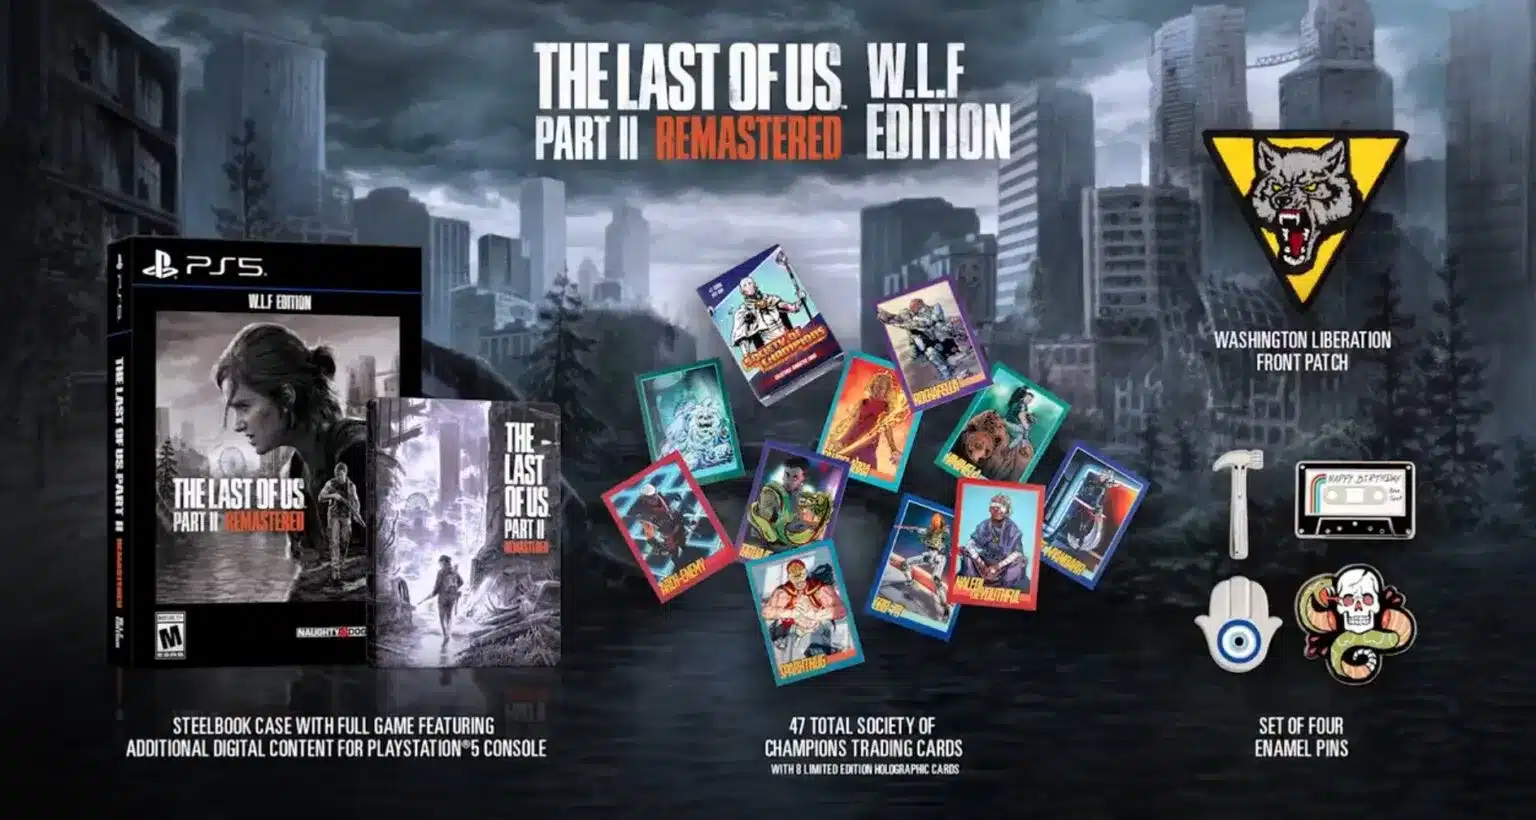 The last of us part 2 remastered wlf edition 1